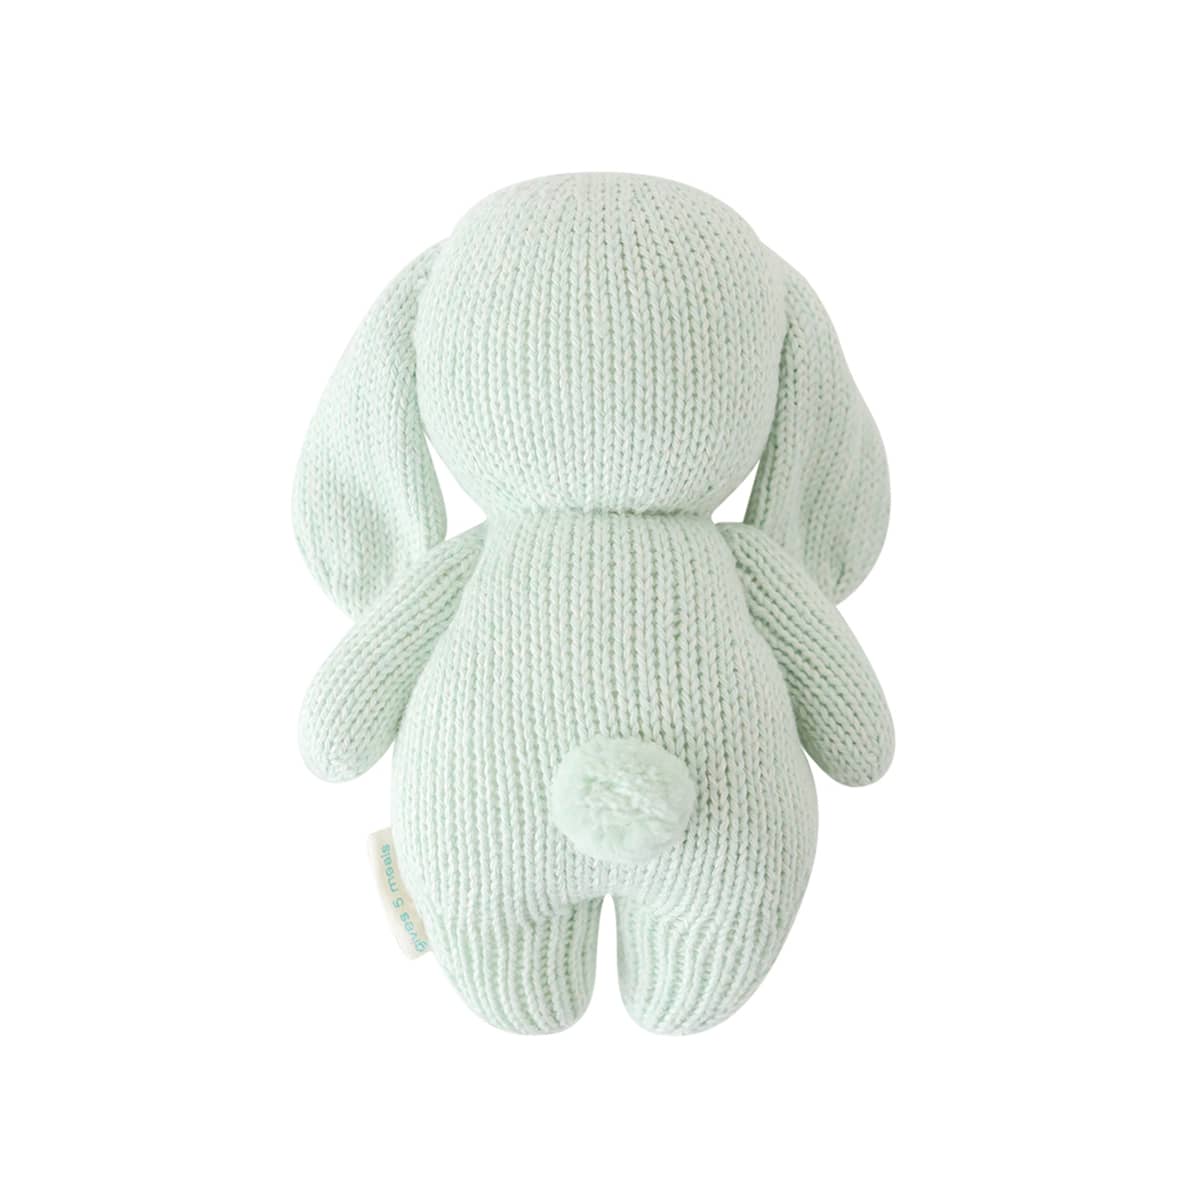 Cuddle + Kind Hand-Knit Doll - Baby Bunny (mint)